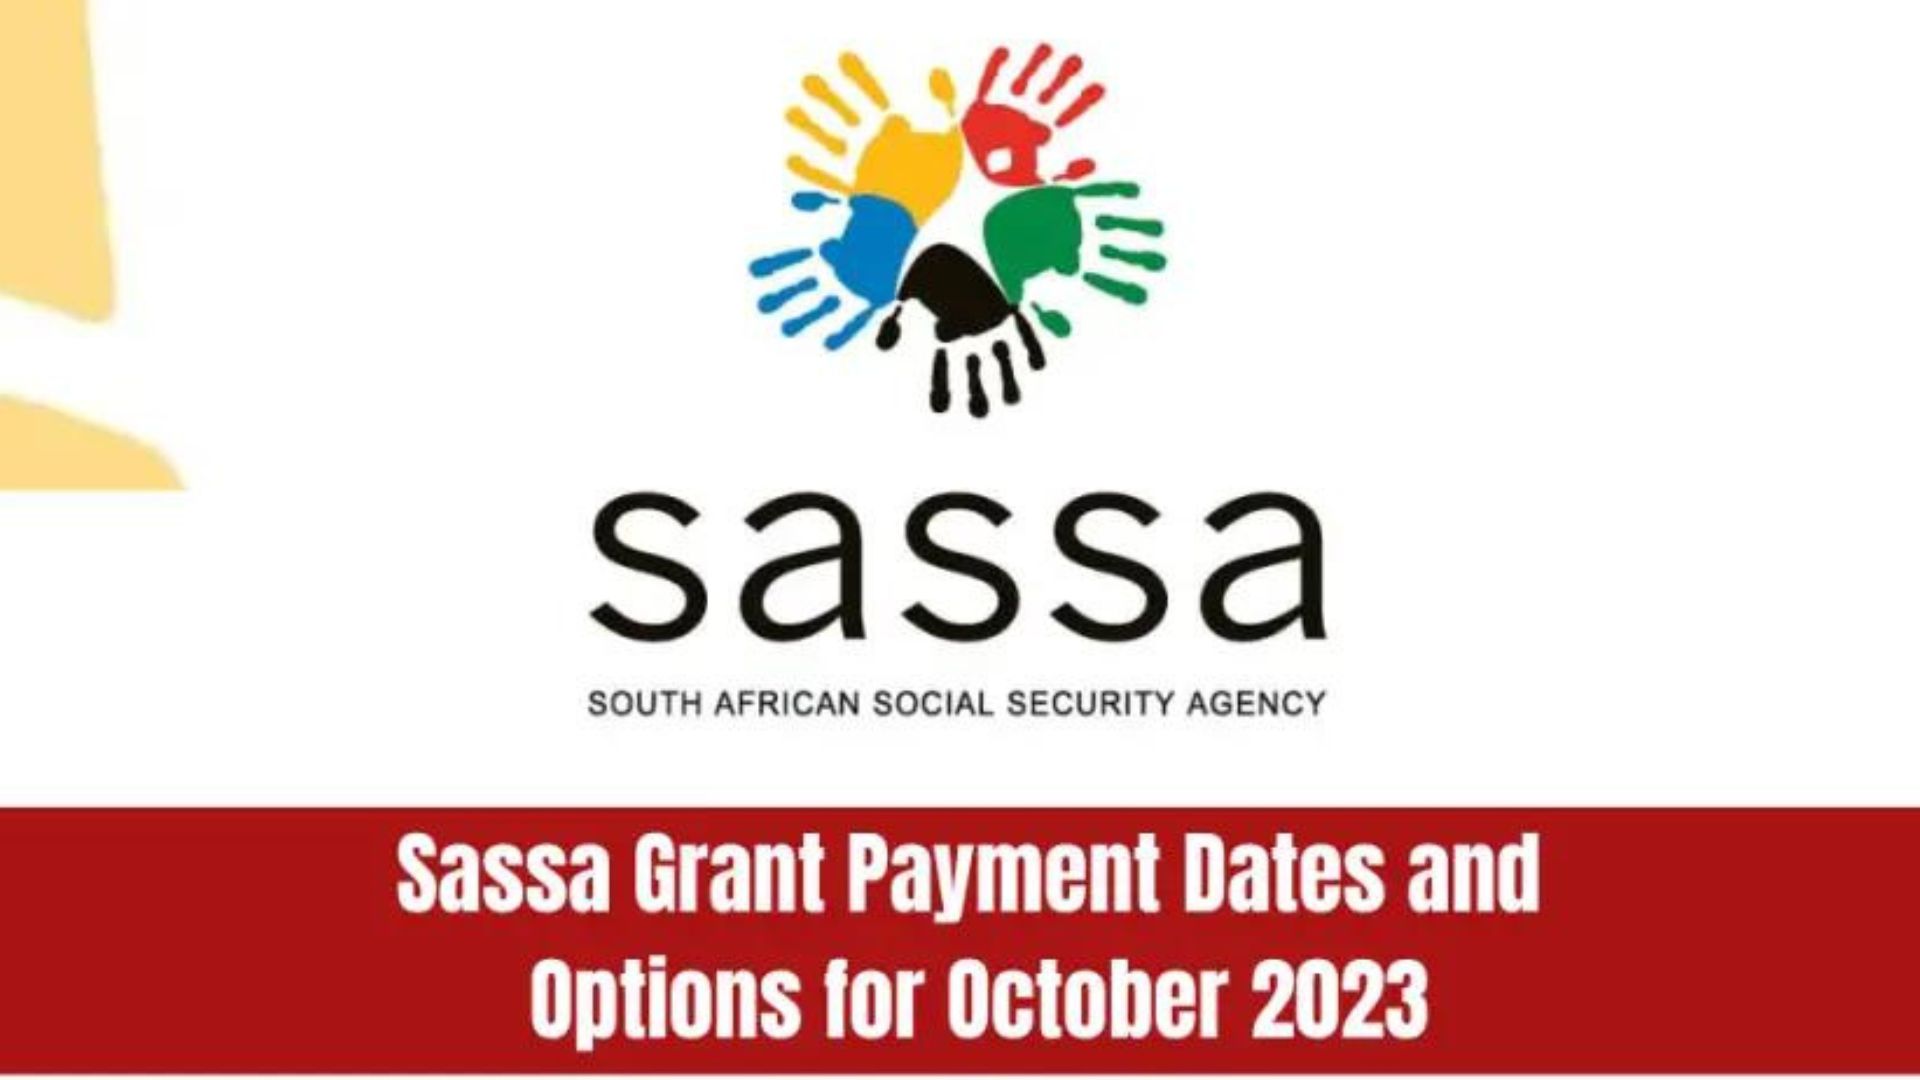 Grant Payment Dates For October 2023